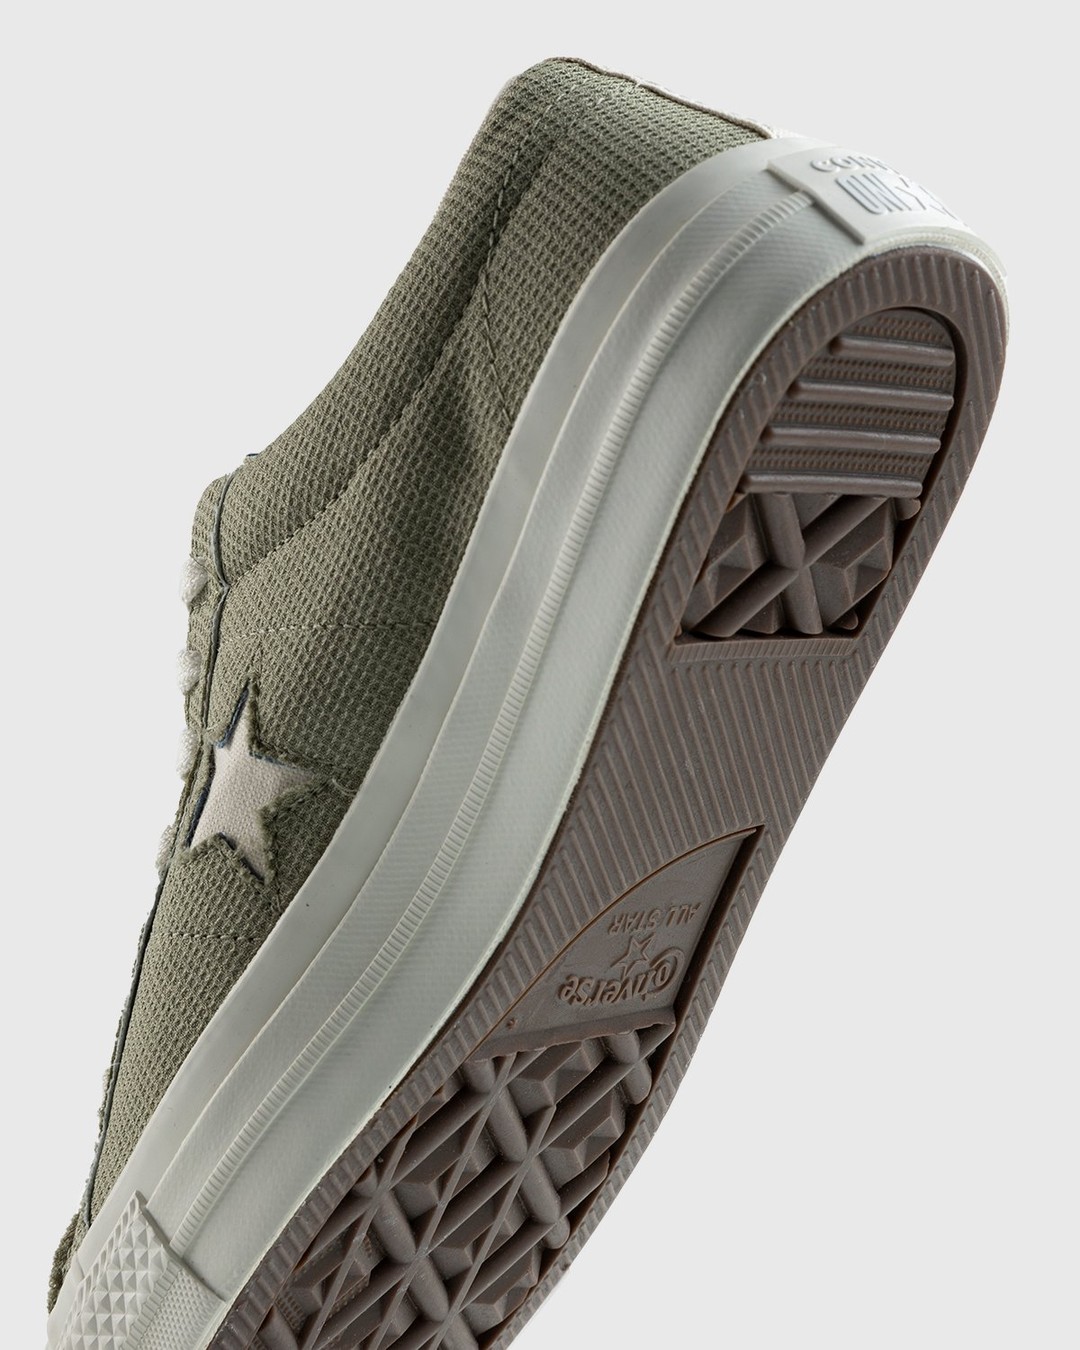 Converse – One Star Ox Indigo/Obsidian/Egret - Sneakers - Green - Image 6